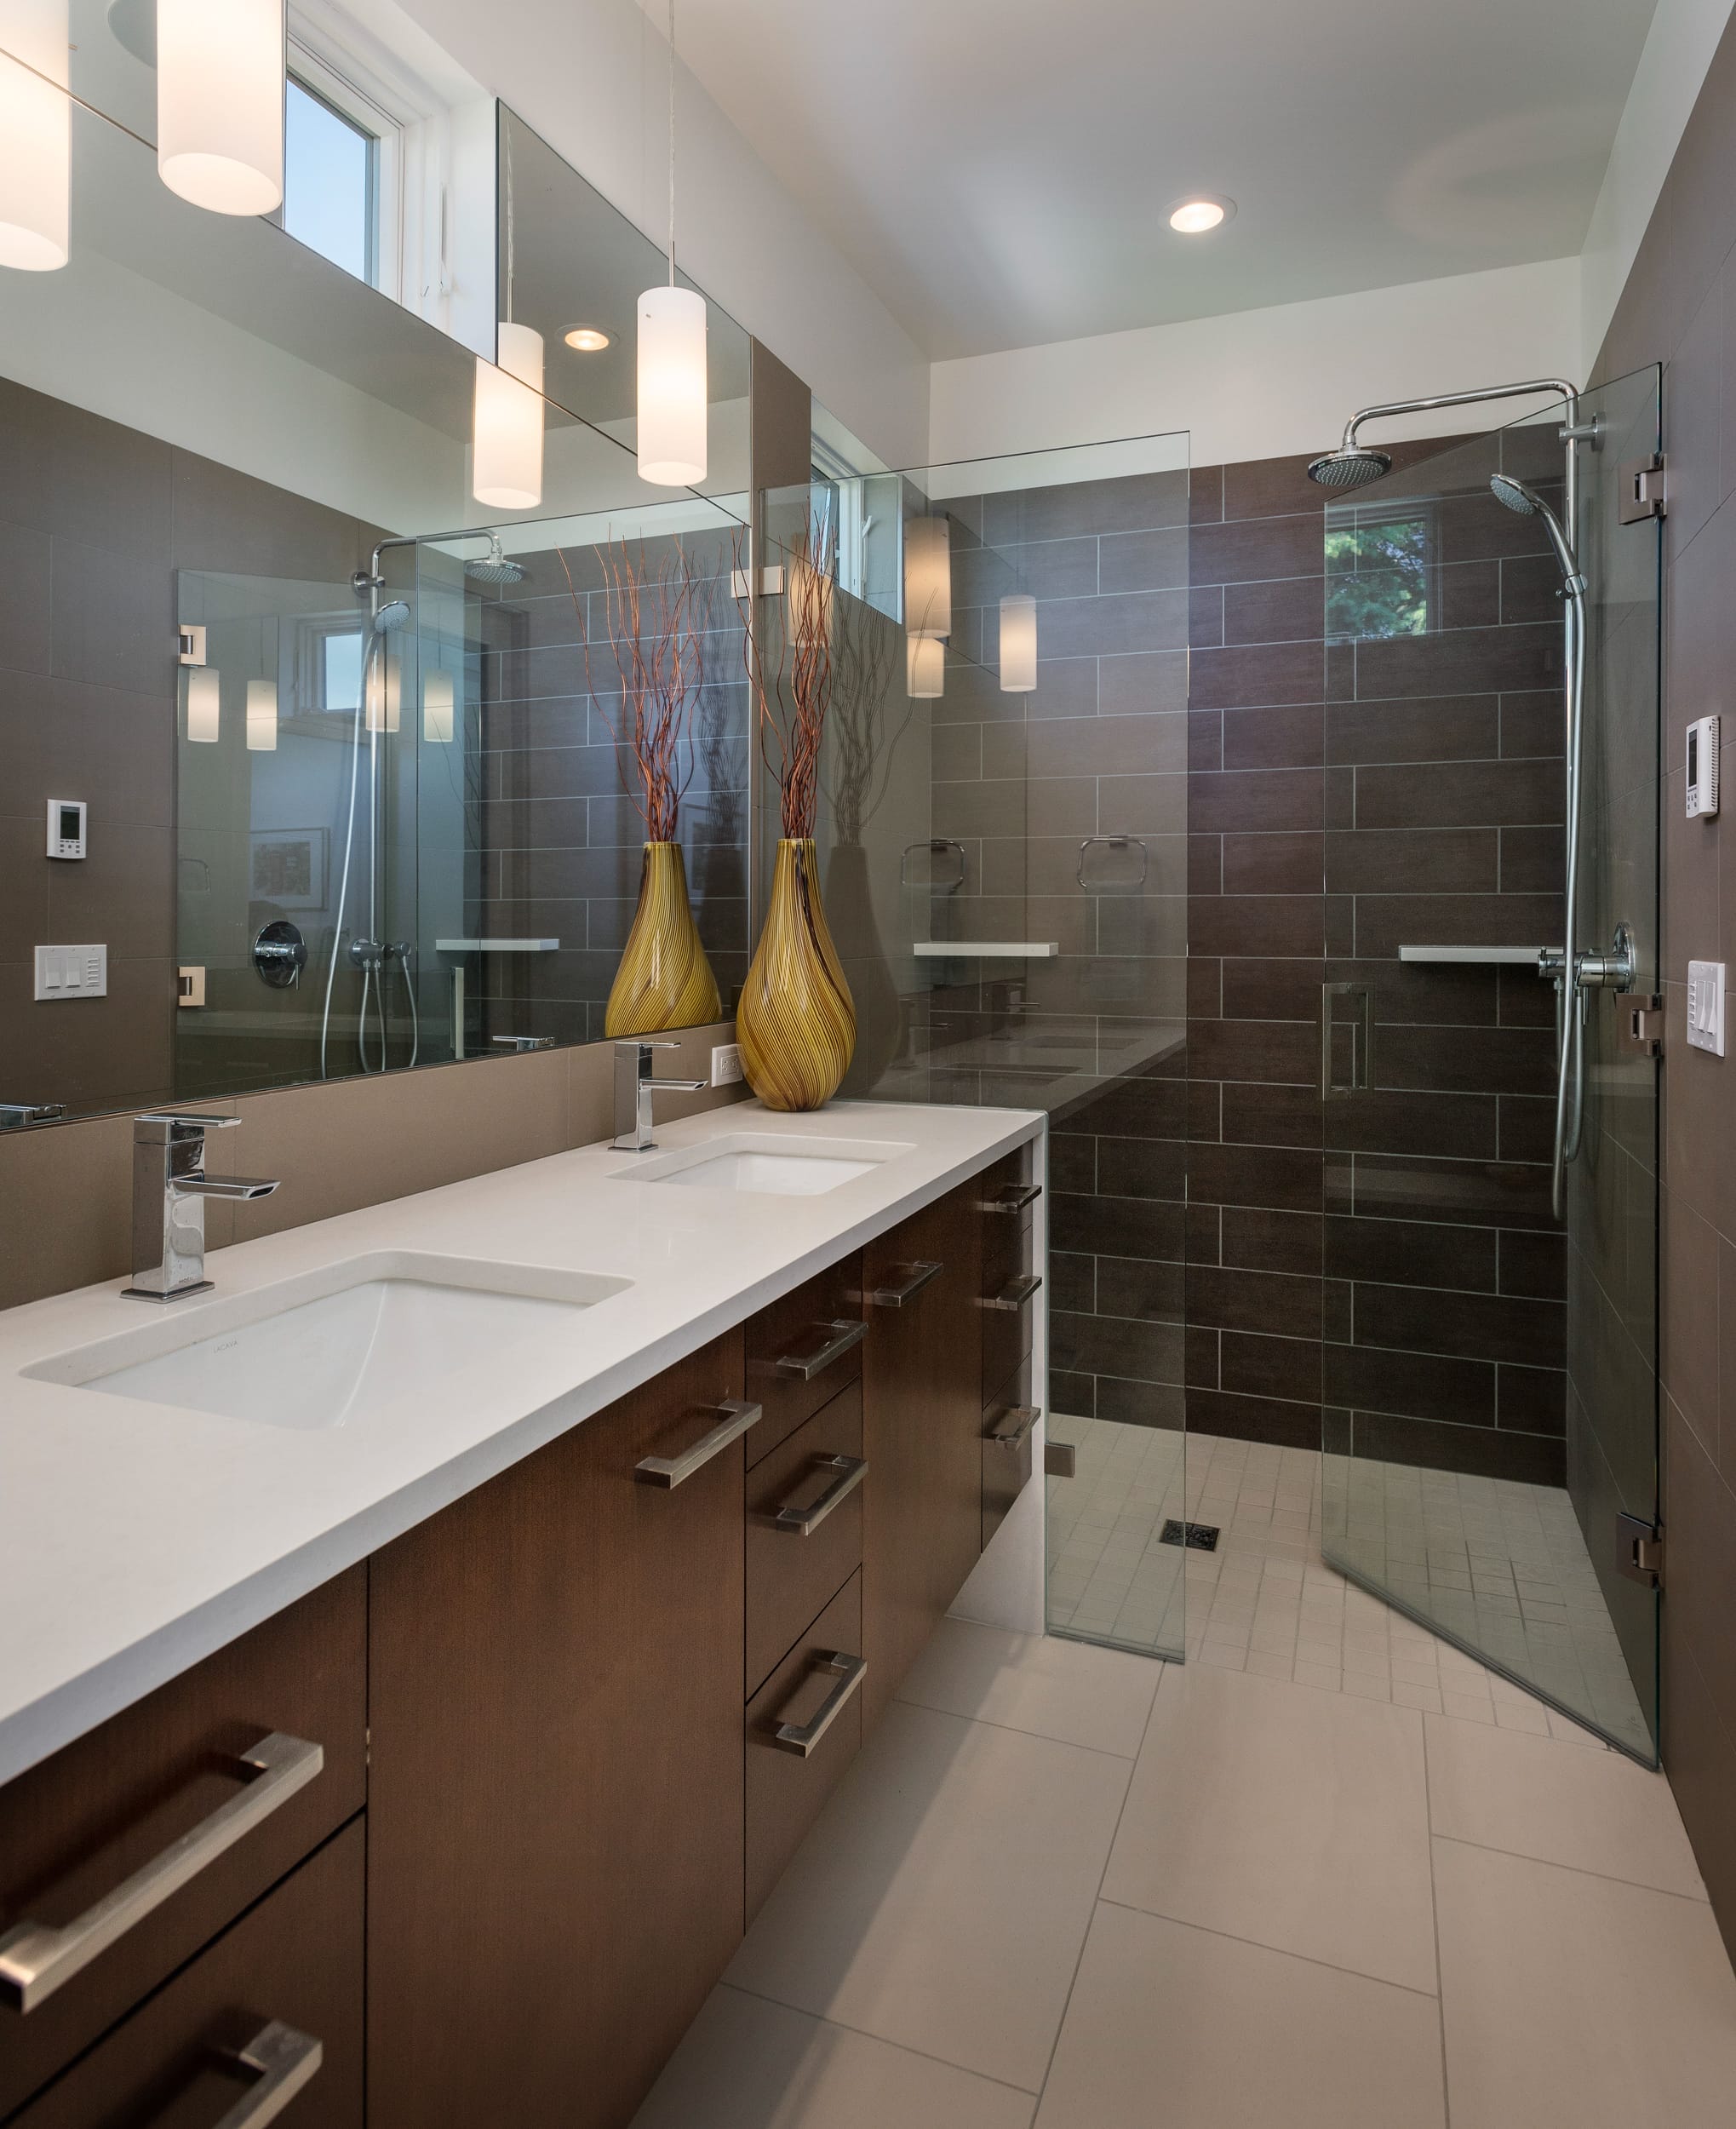 A modern bathroom with a glass shower and sink.